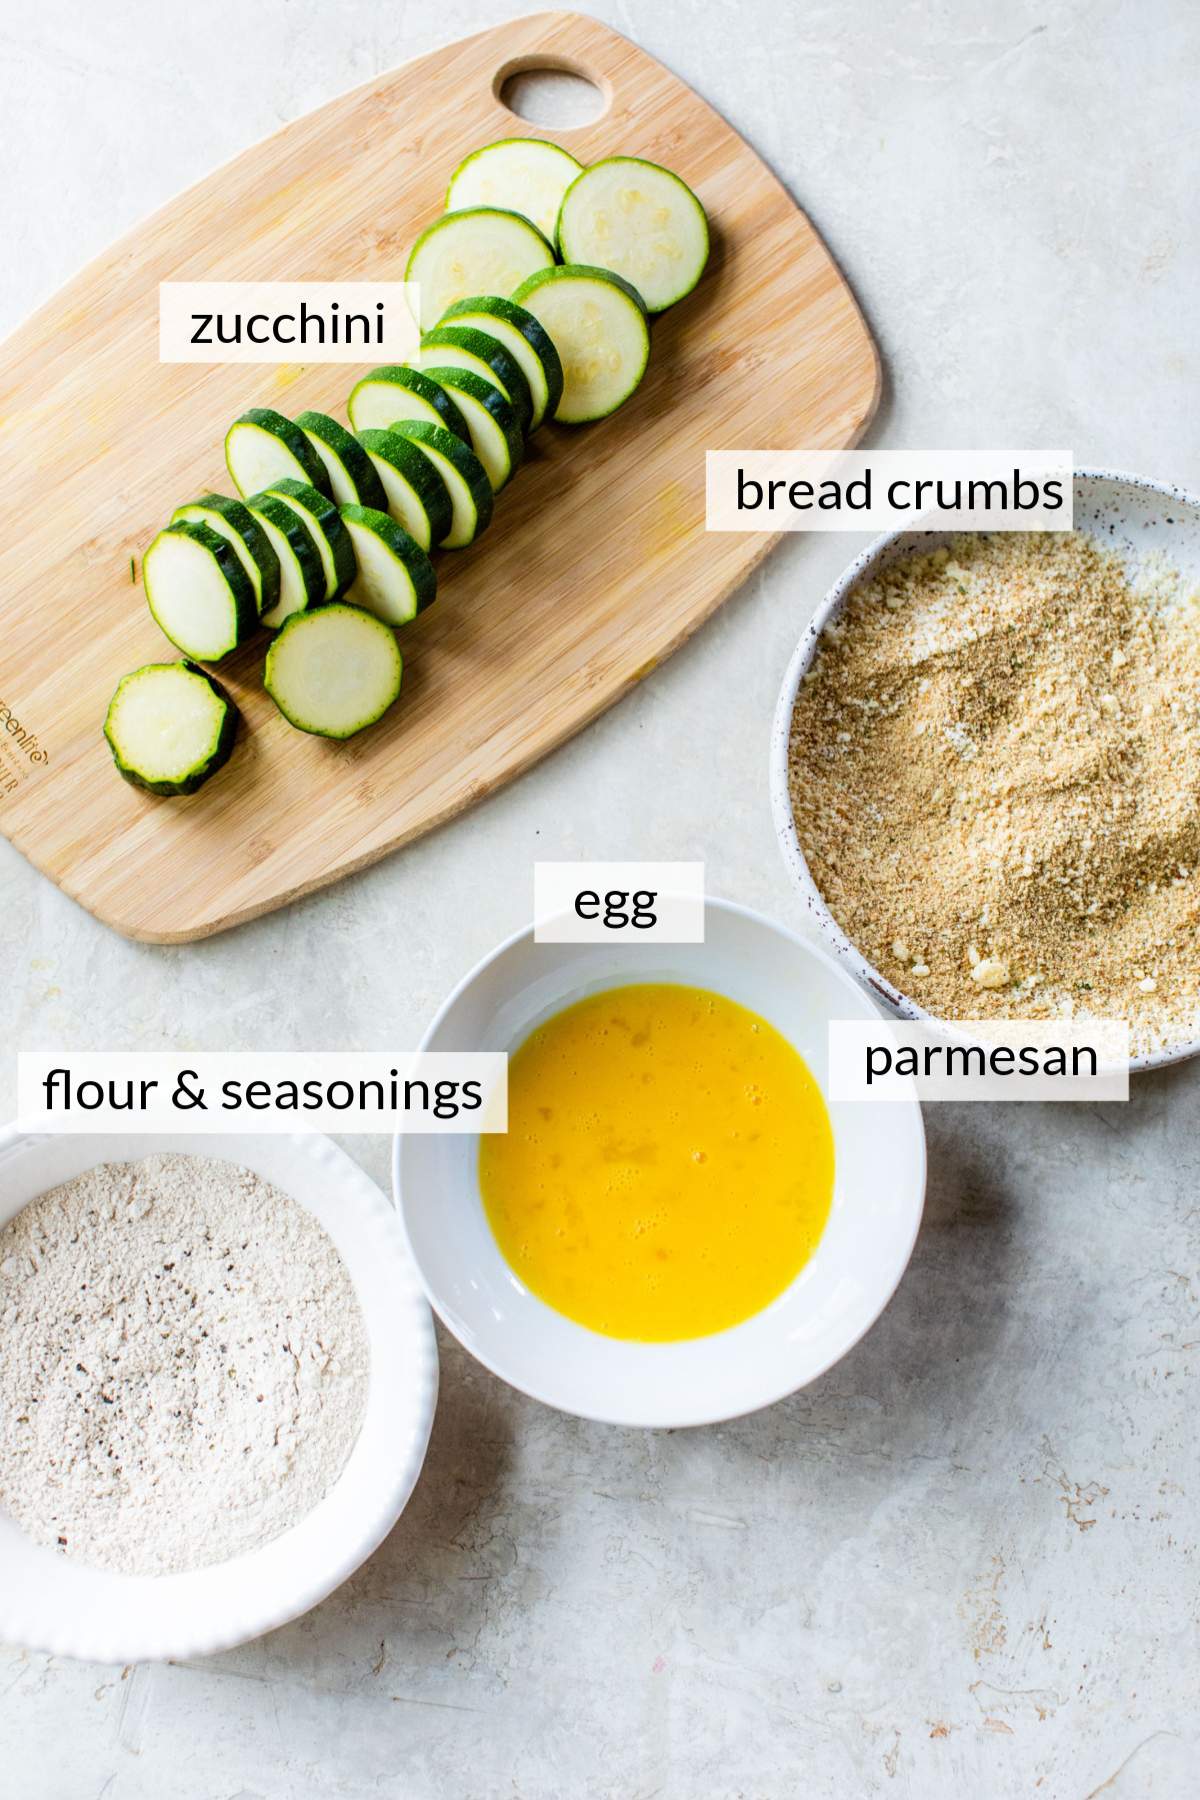 Sliced zucchini on a cutting board near bowls of breadcrumbs, whisked egg and flour.